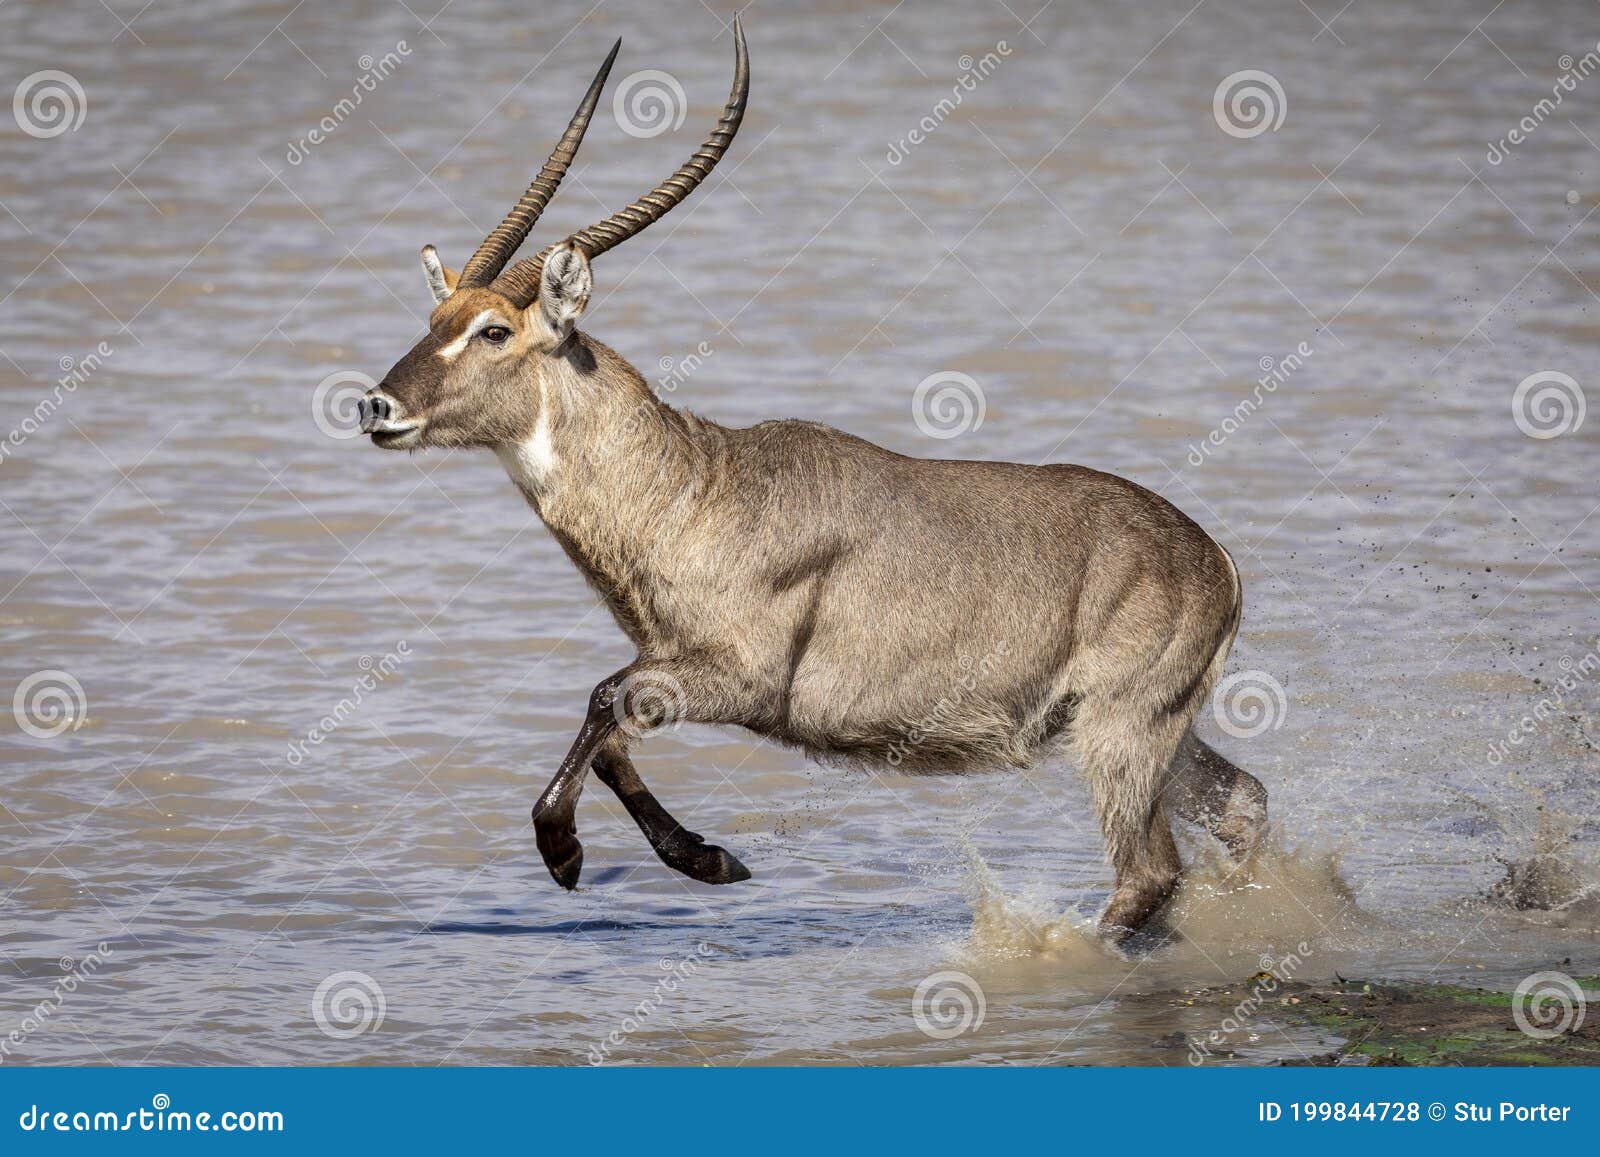 male waterbuck running through water in sunlight in kruger park in south africa